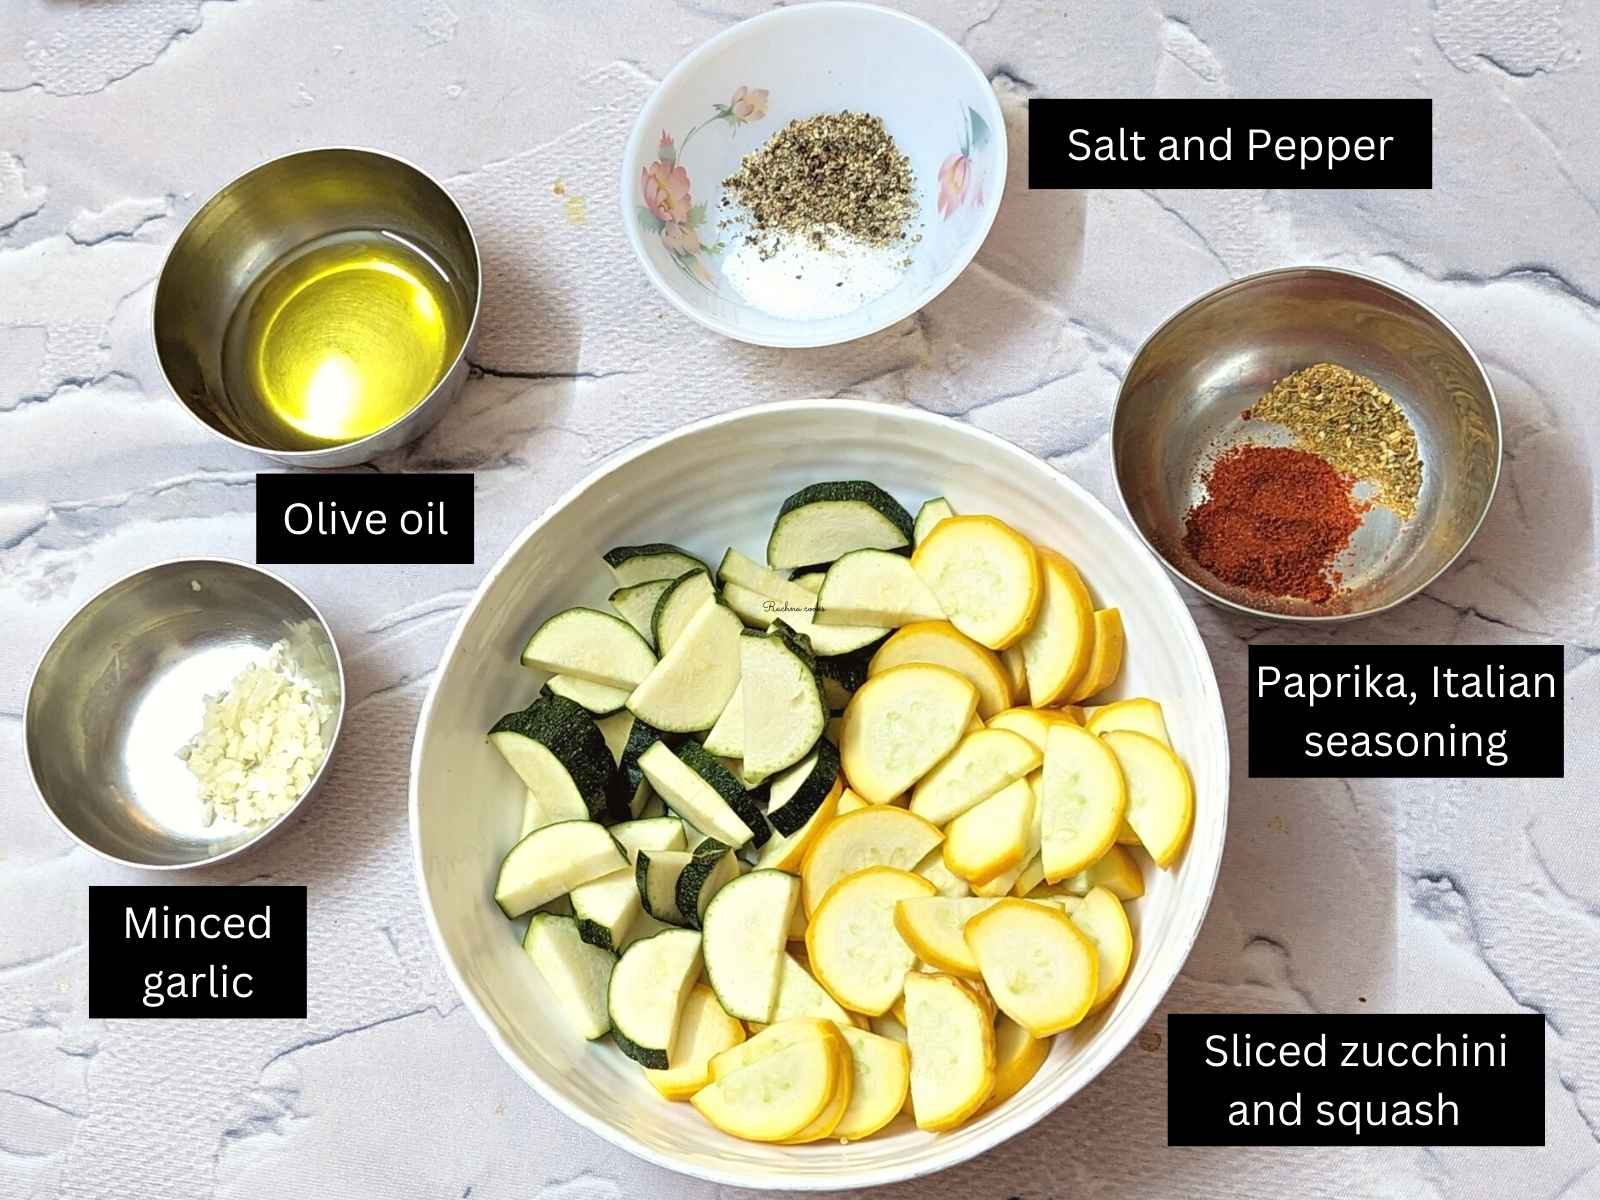 Ingredients for making air fryer zucchini: sliced zucchini and squash, olive oil, seasonings, minced garlic and lemon juice